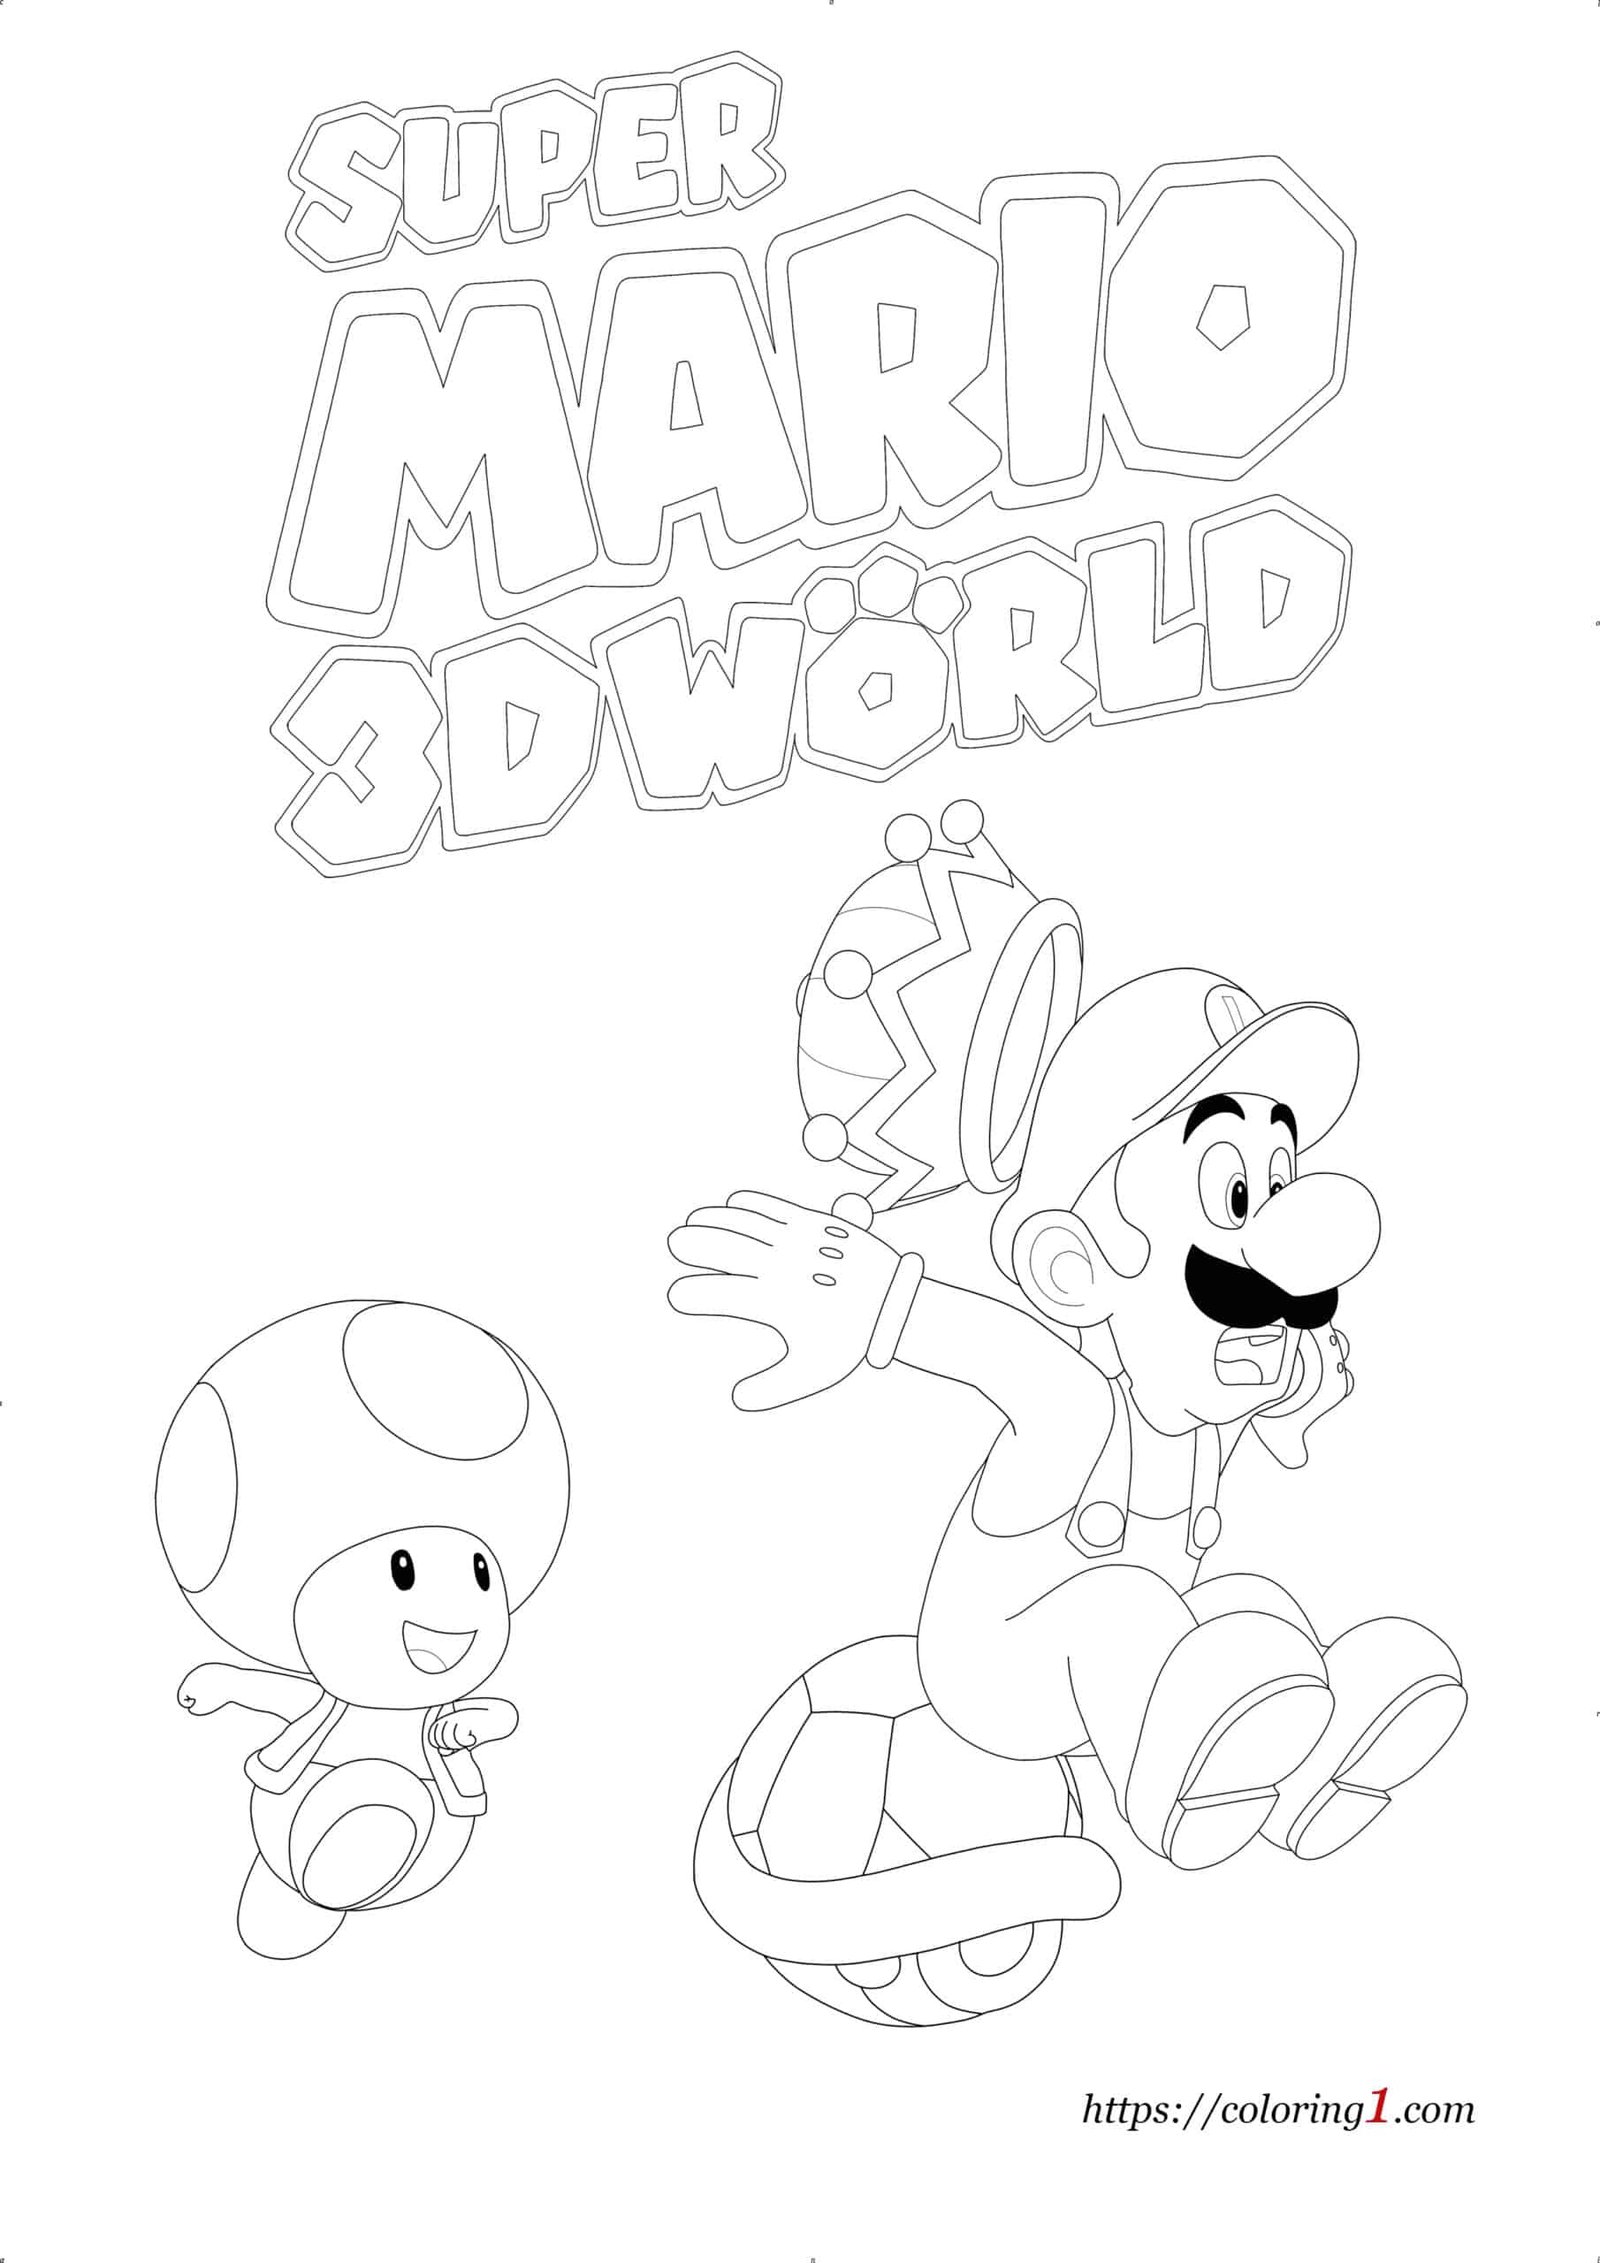 Super mario d world coloring pages